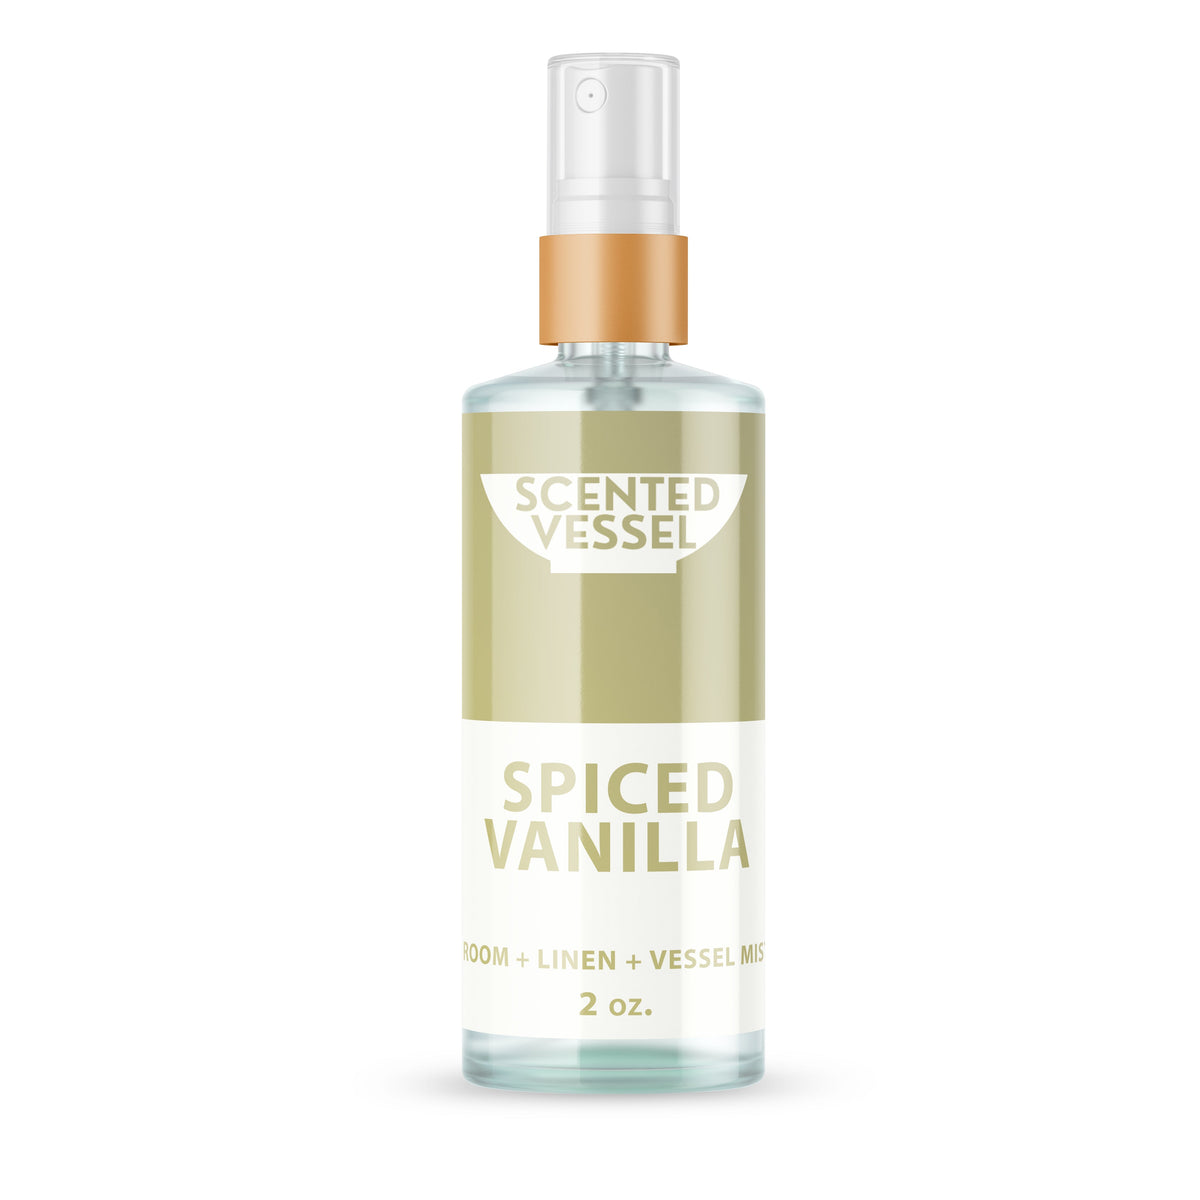 Spiced Vanilla 2oz Fragrance Mist by Scented Vessel